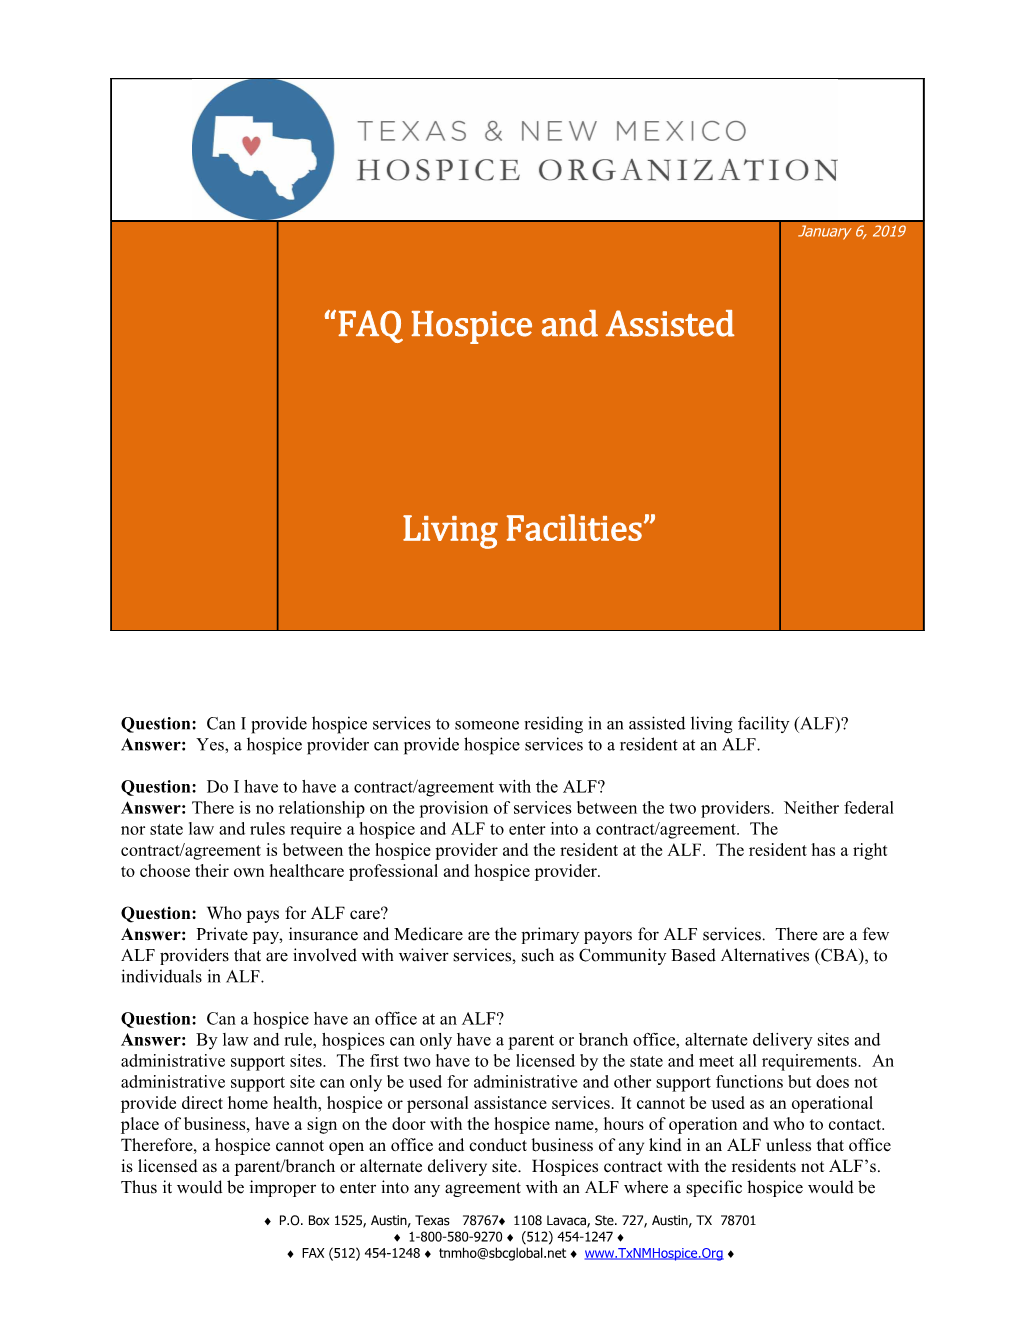 Question: Can I Provide Hospice Services to Someone Residing in an Assisted Living Facility